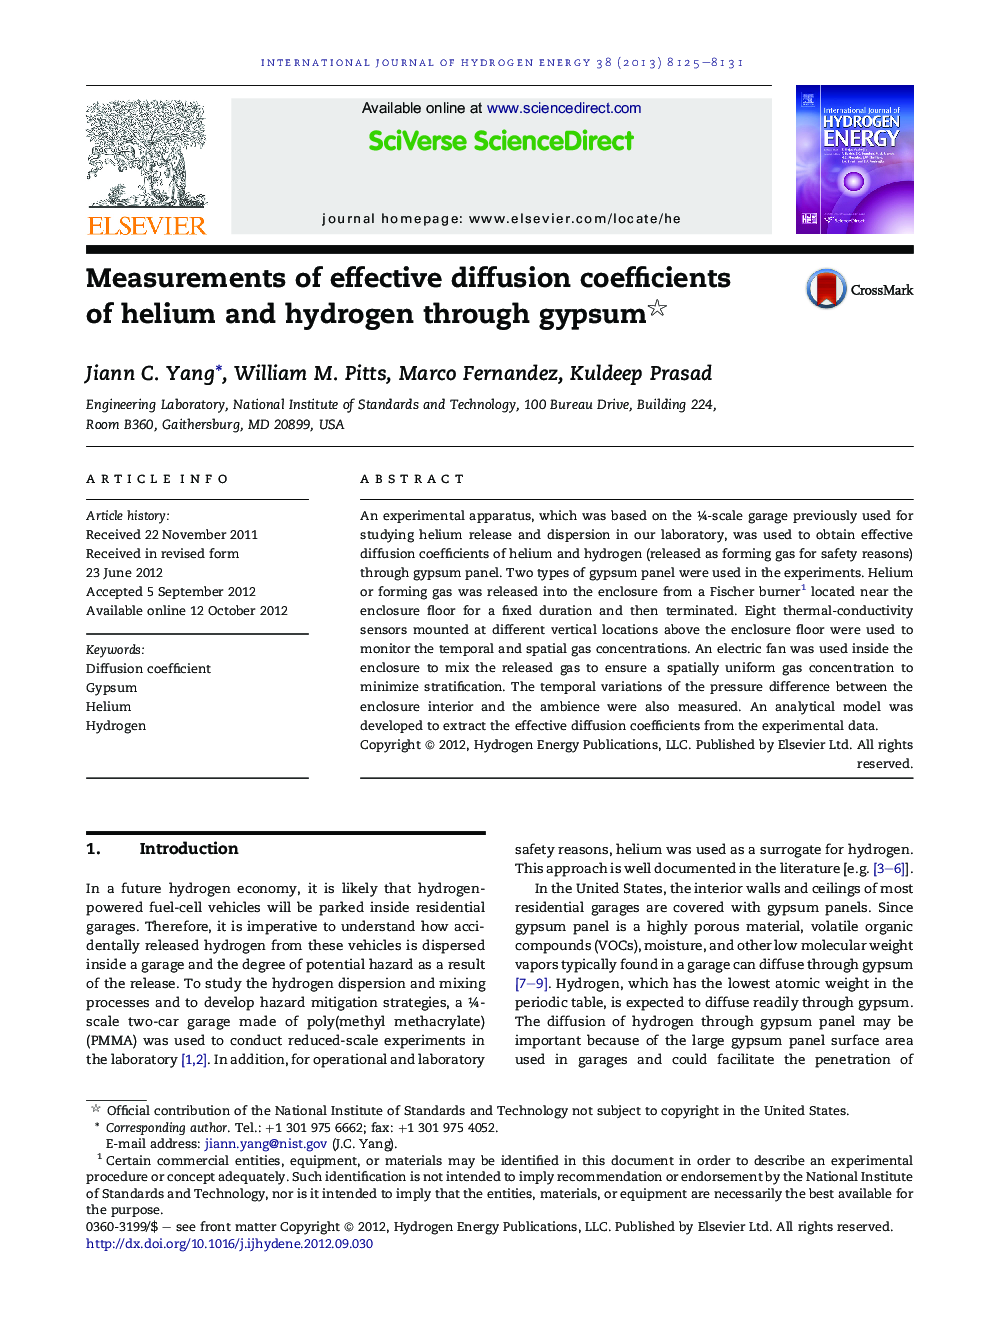 Measurements of effective diffusion coefficients of helium and hydrogen through gypsum 